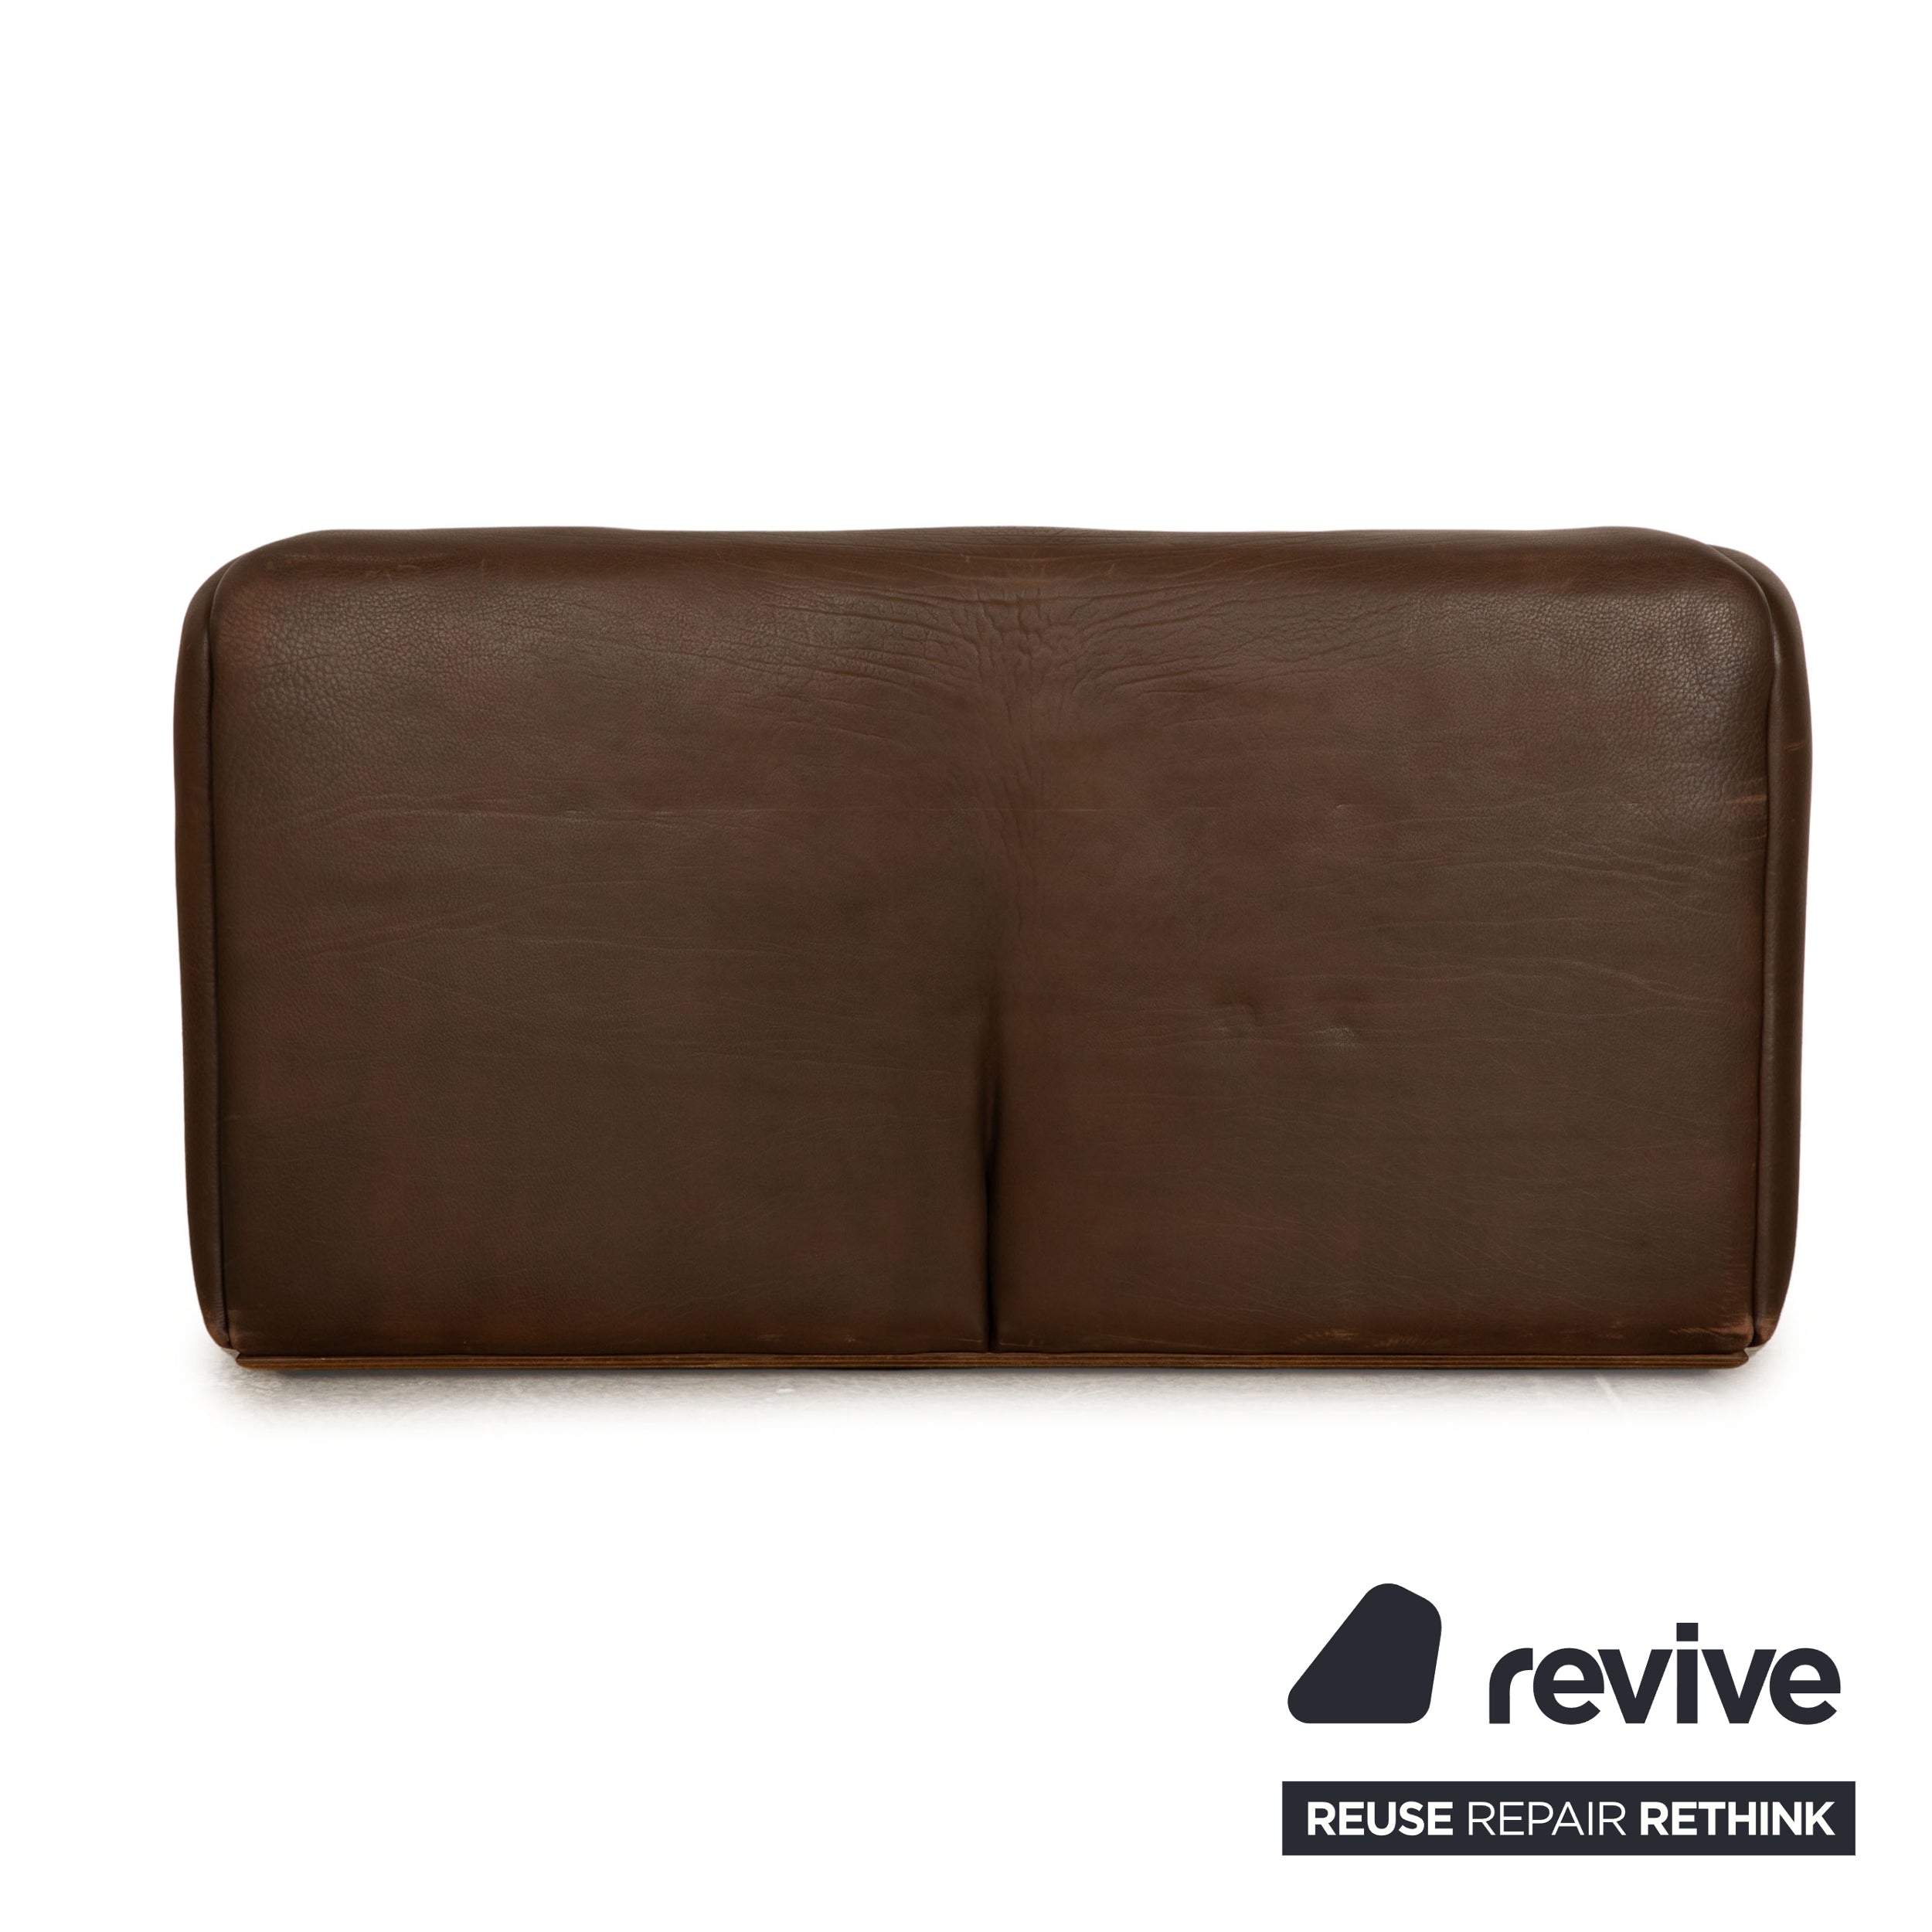 de Sede DS 47 leather two-seater brown sofa couch manual function